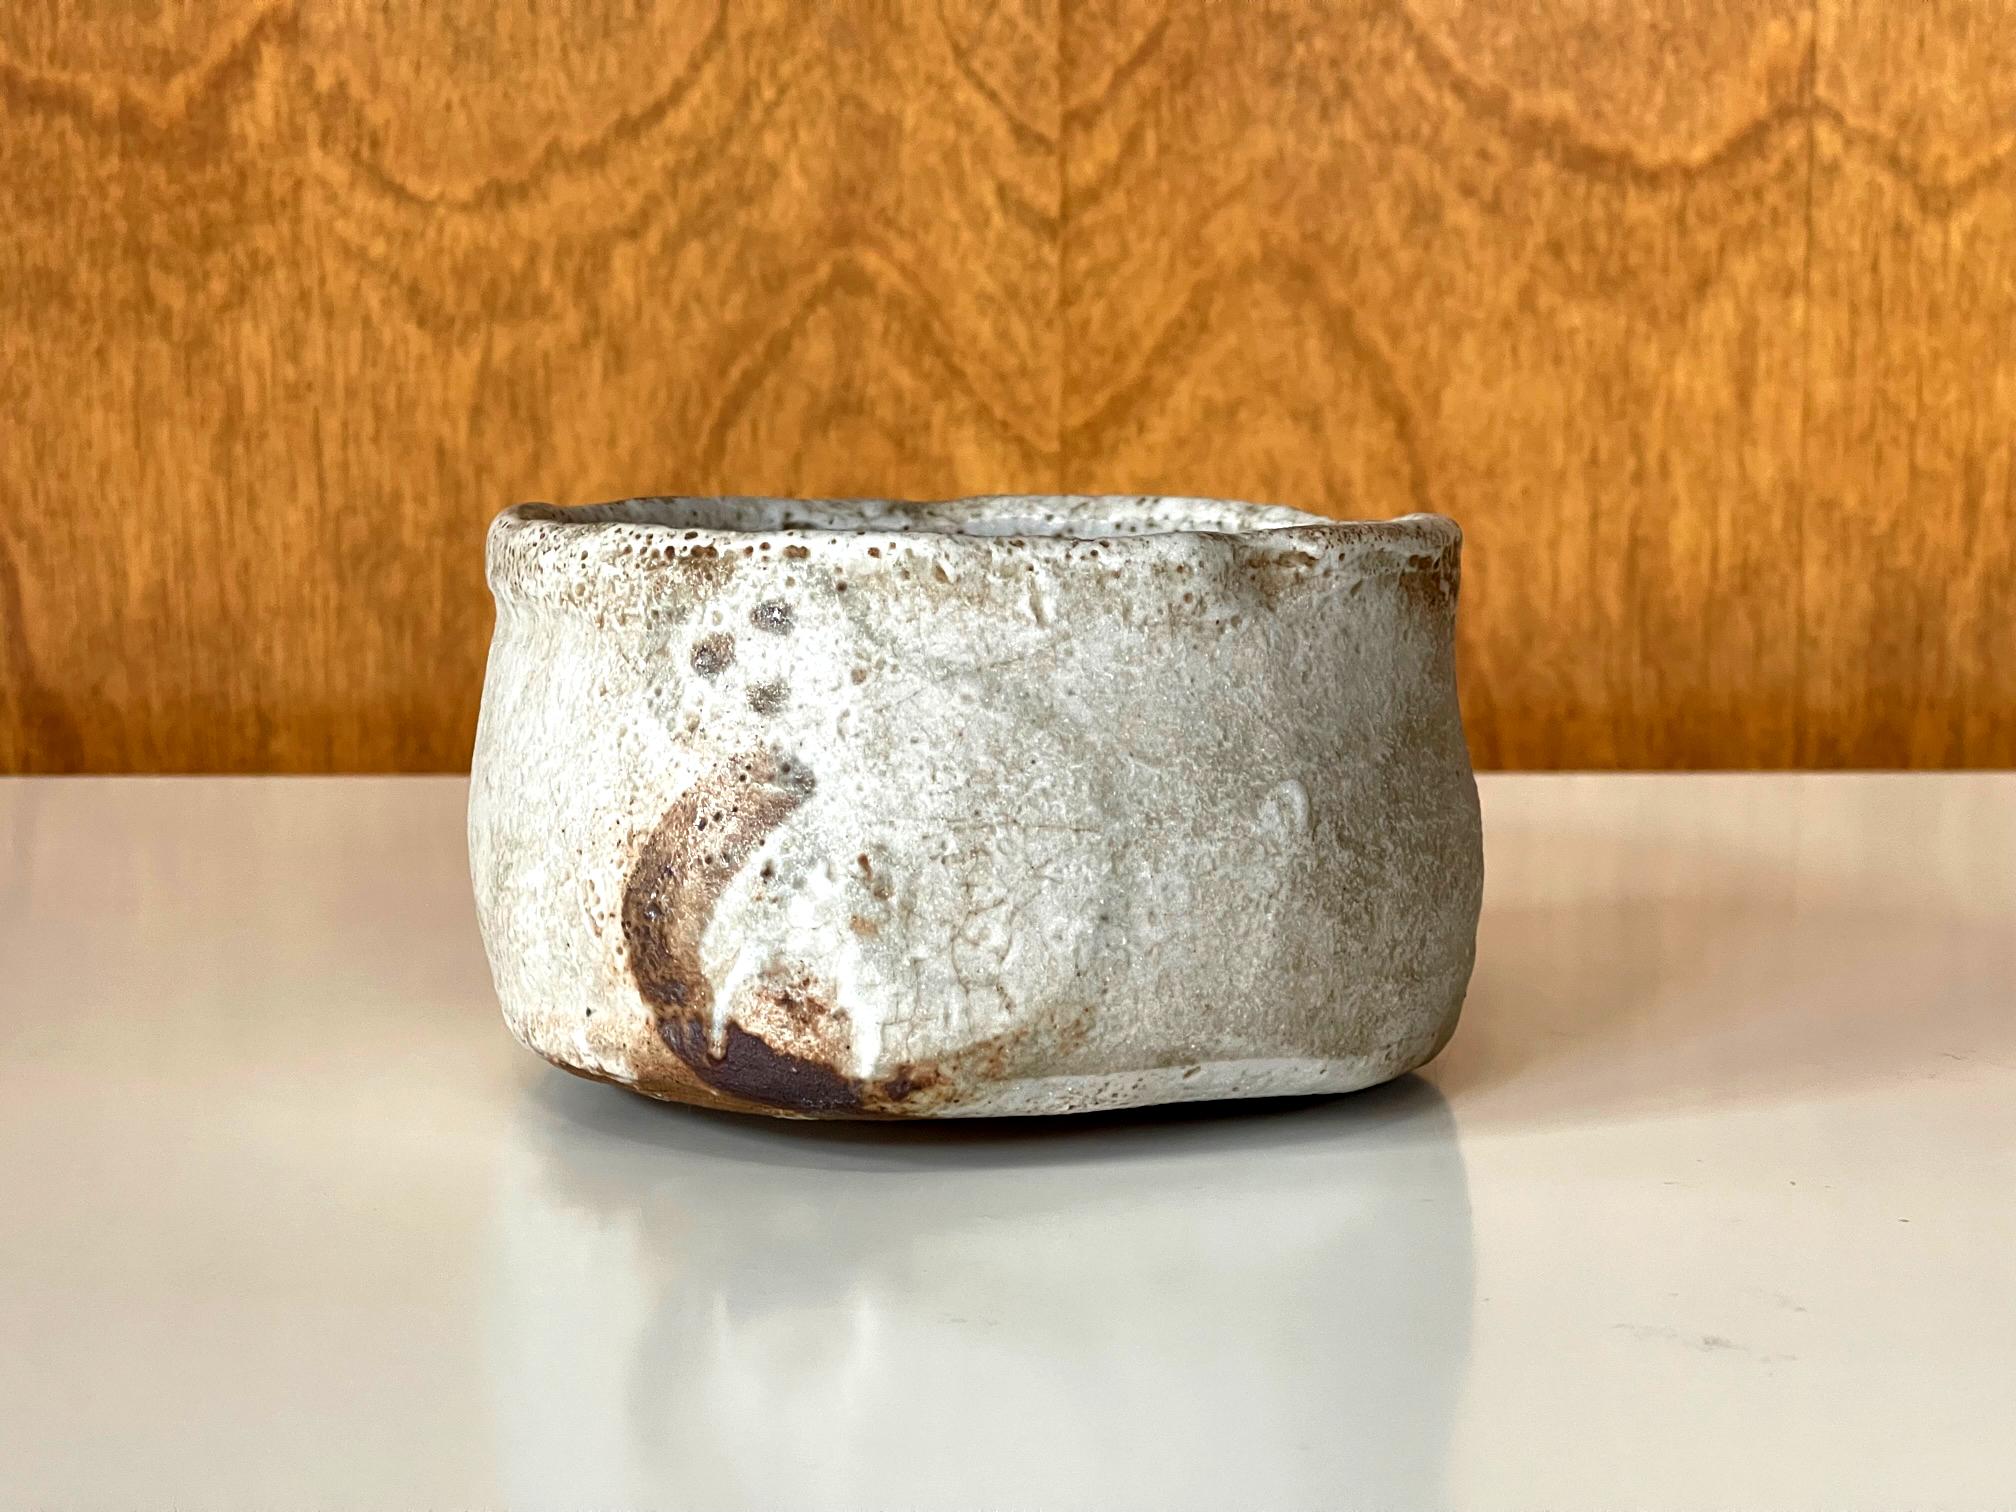 On offer is a Japanese ceramic tea bowl (chawan) used in the traditional chado ceremony. The bowl was potted in clog form with a ring foot shaved extremely low. Its size and harmonious proportion make it perfect to be held in both hands during